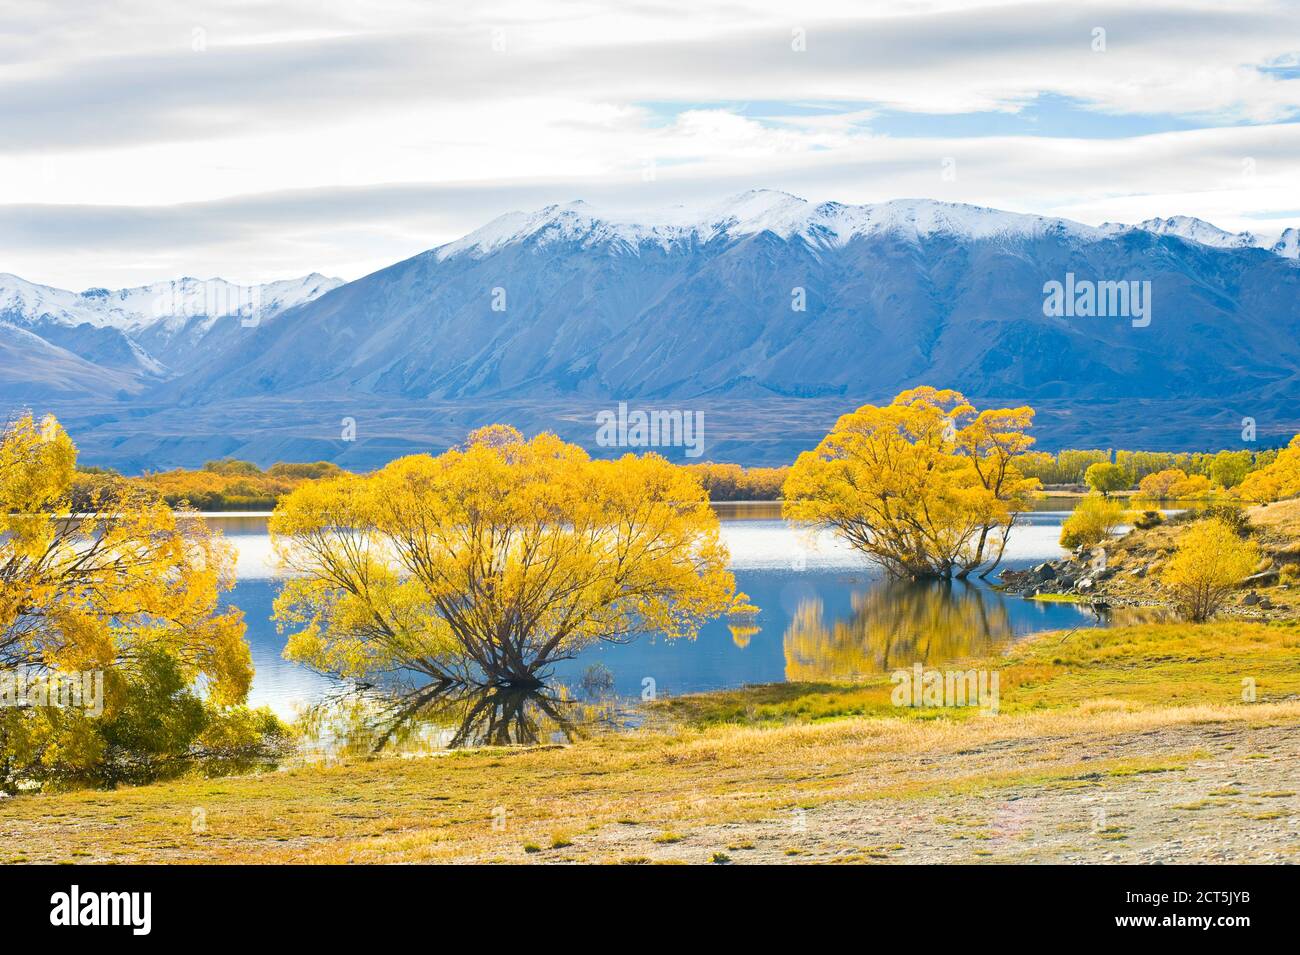 Snow Capped Mountains and Autumn Trees at Lake Alexandrina, South Island, New Zealand Stock Photo